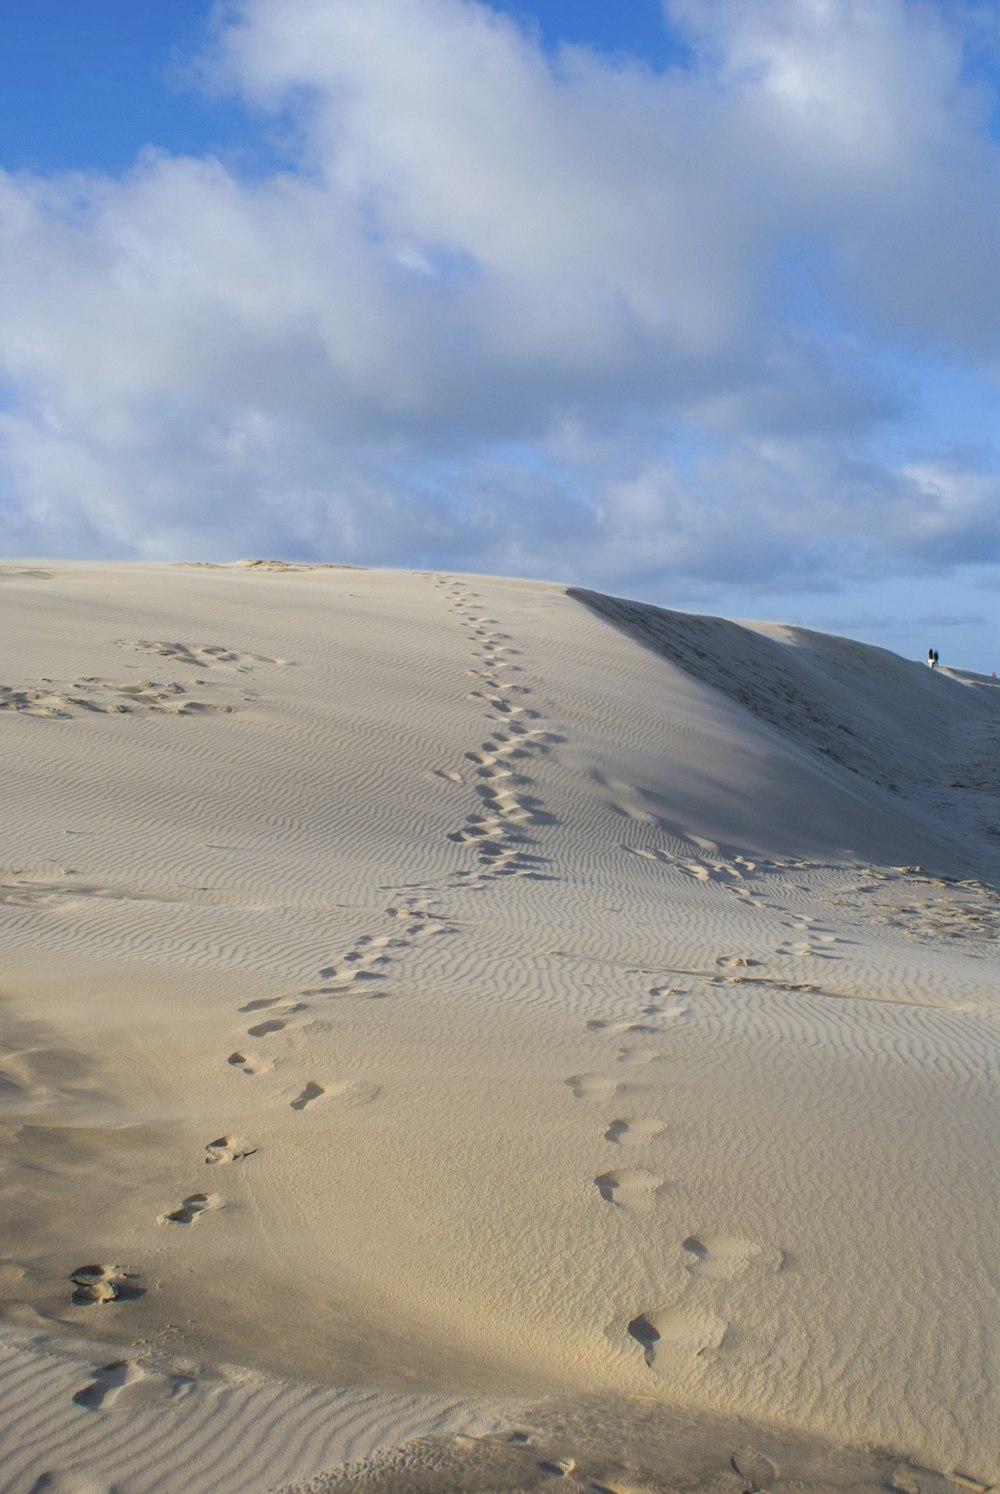 a large sand dune with tracks in the sand